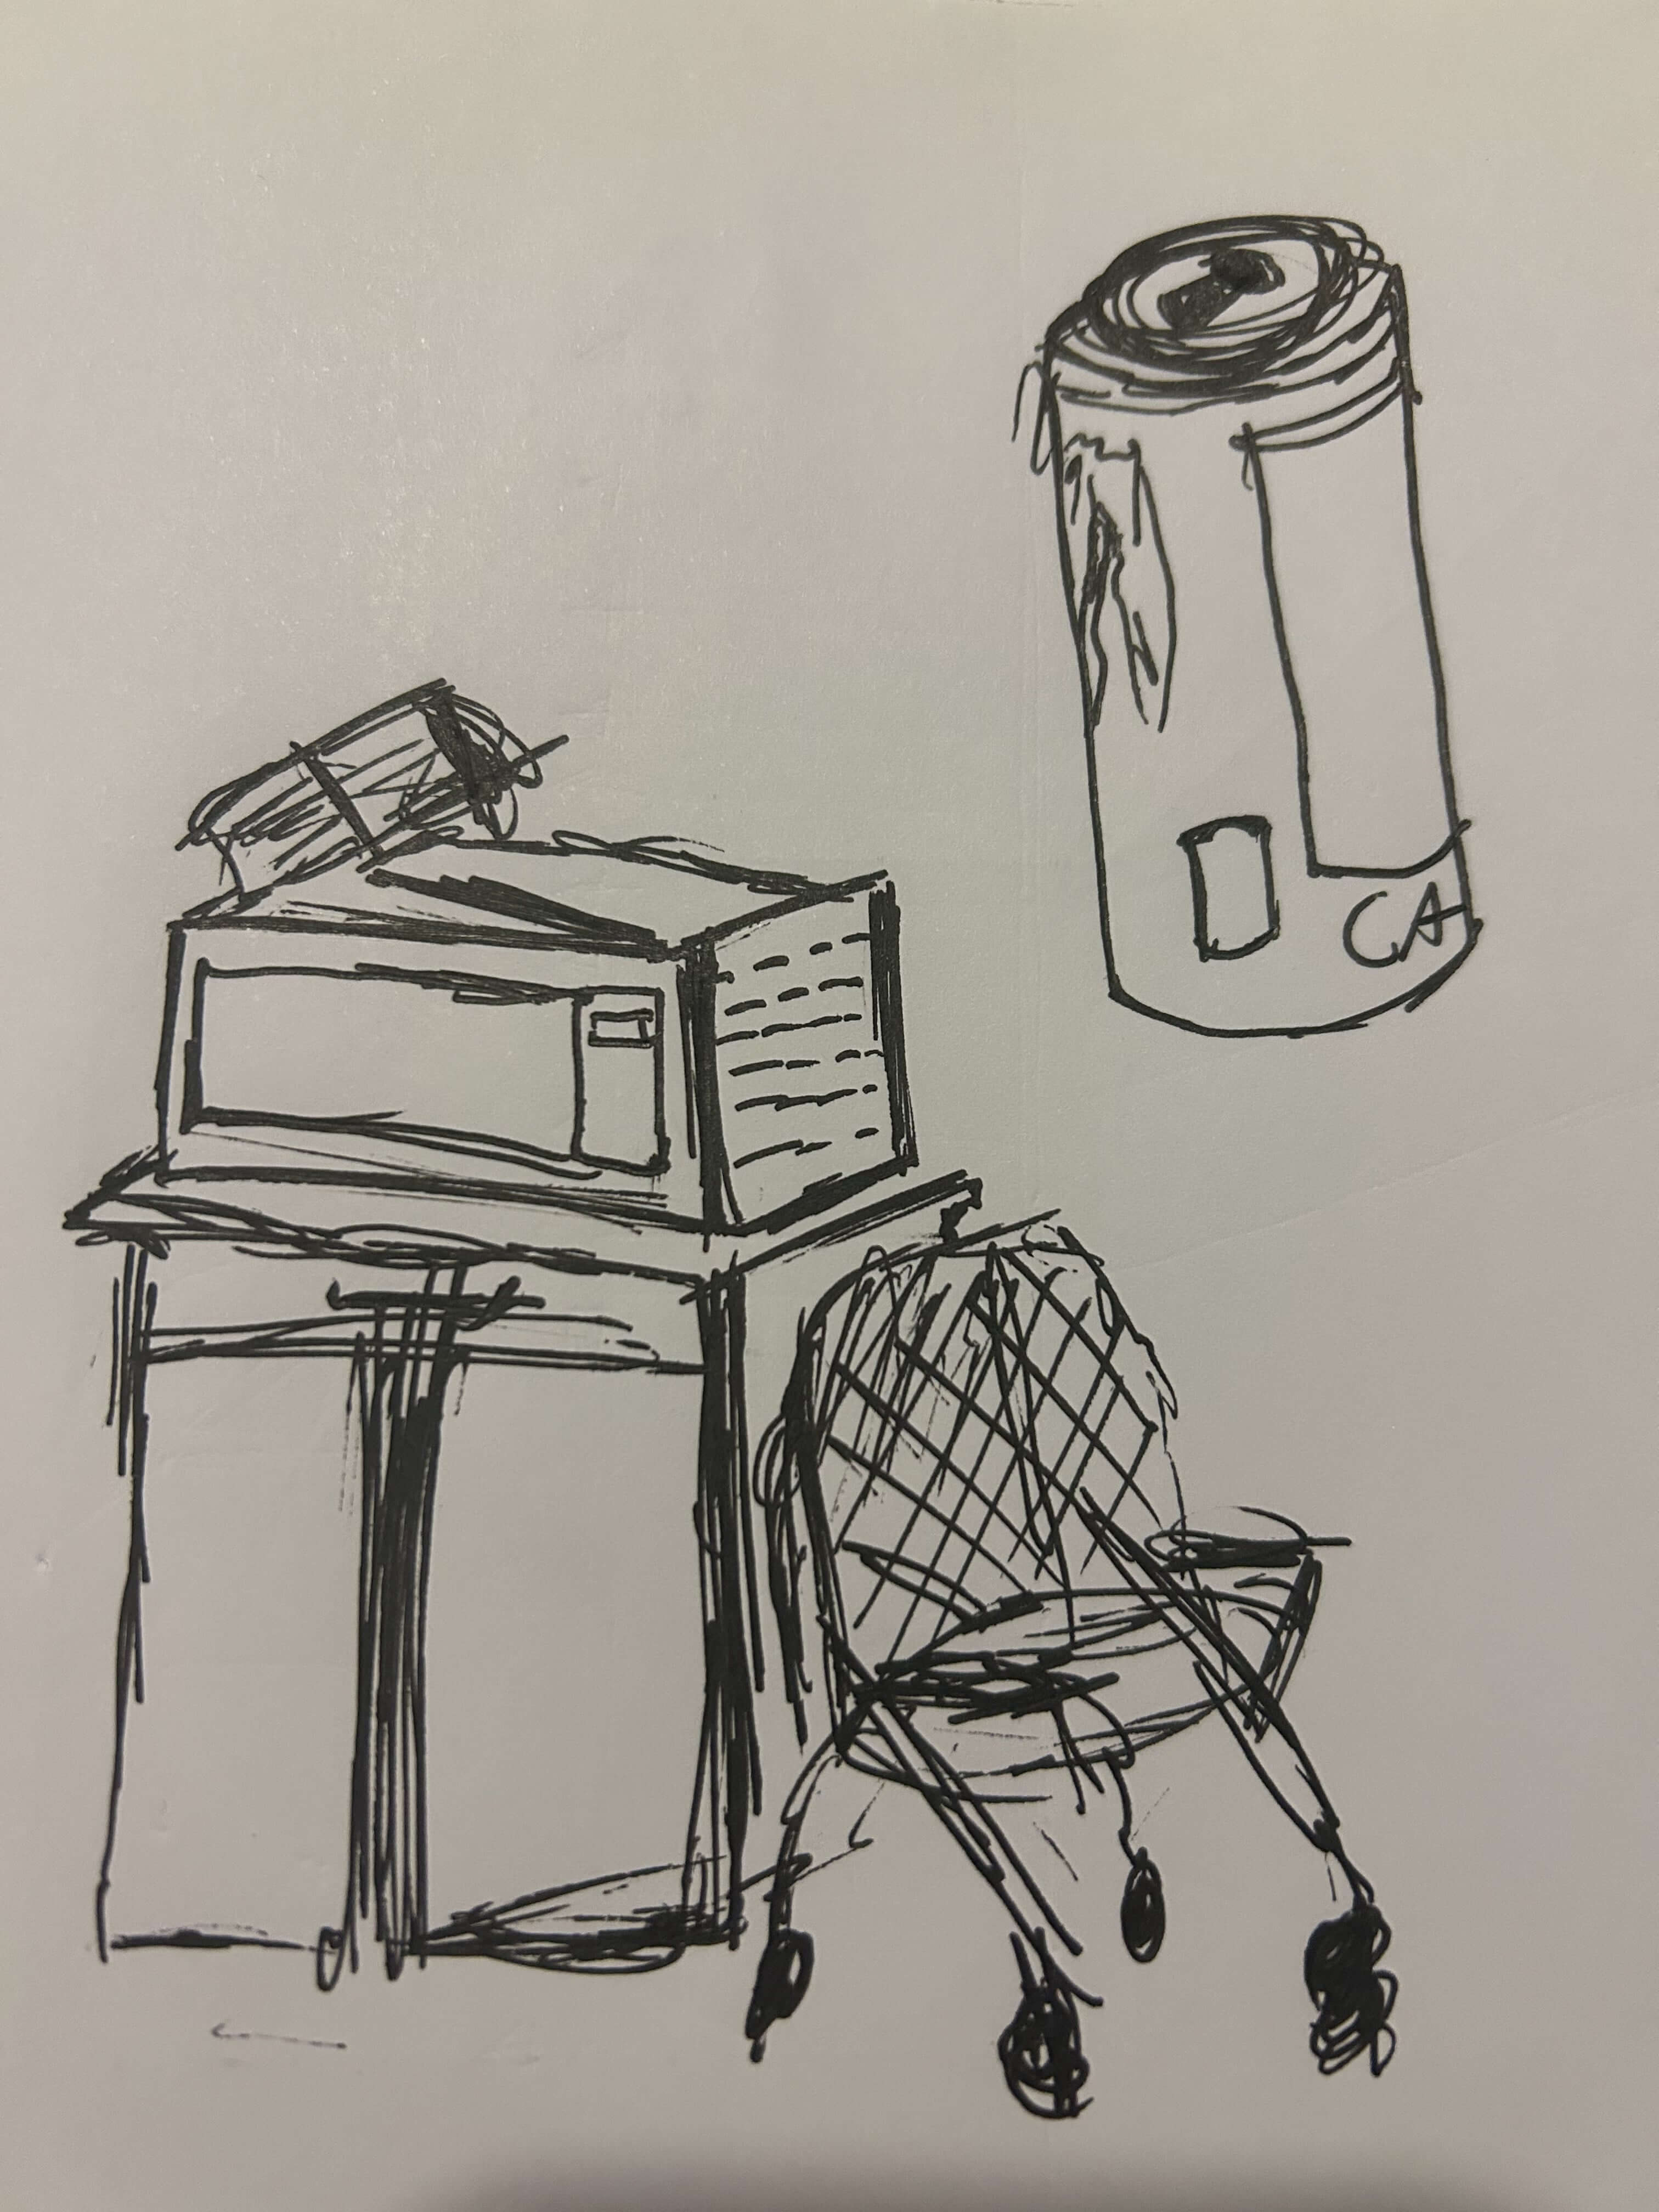 a set of pen sketches, at the top right is a monster can, and the rest of the page is taken up by a cabinet, toaster oven, and a chair.